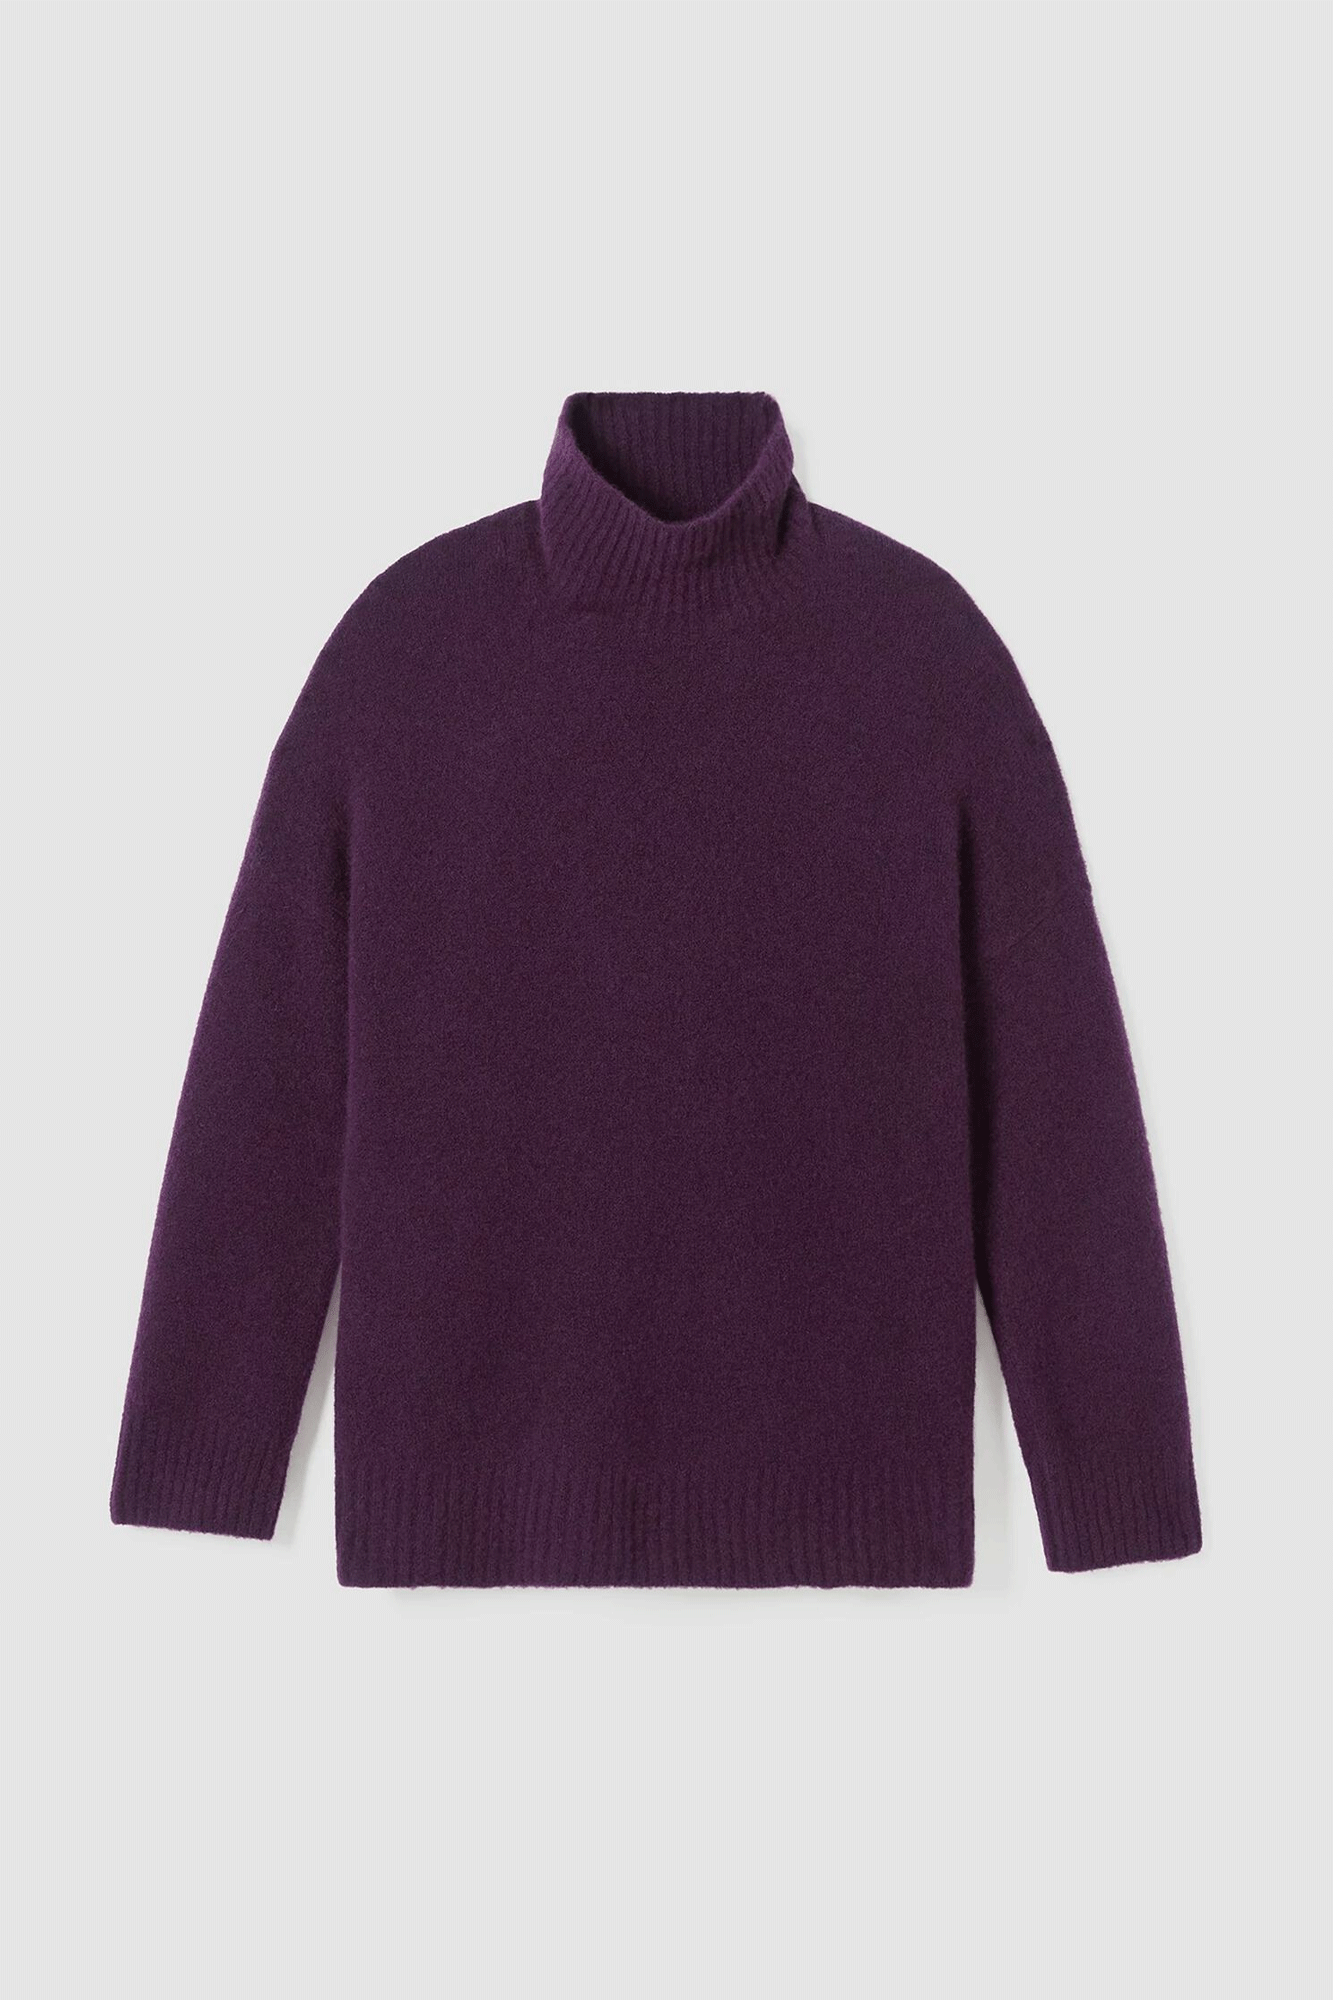 This Turtle Neck Box Top from Eileen Fisher is a perfect combination of luxury and comfort. Crafted from cashmere and silk for a wonderfully soft feel, it features a turtleneck and ribbed trim for a classic look that you'll love. Stay cozy all season long.